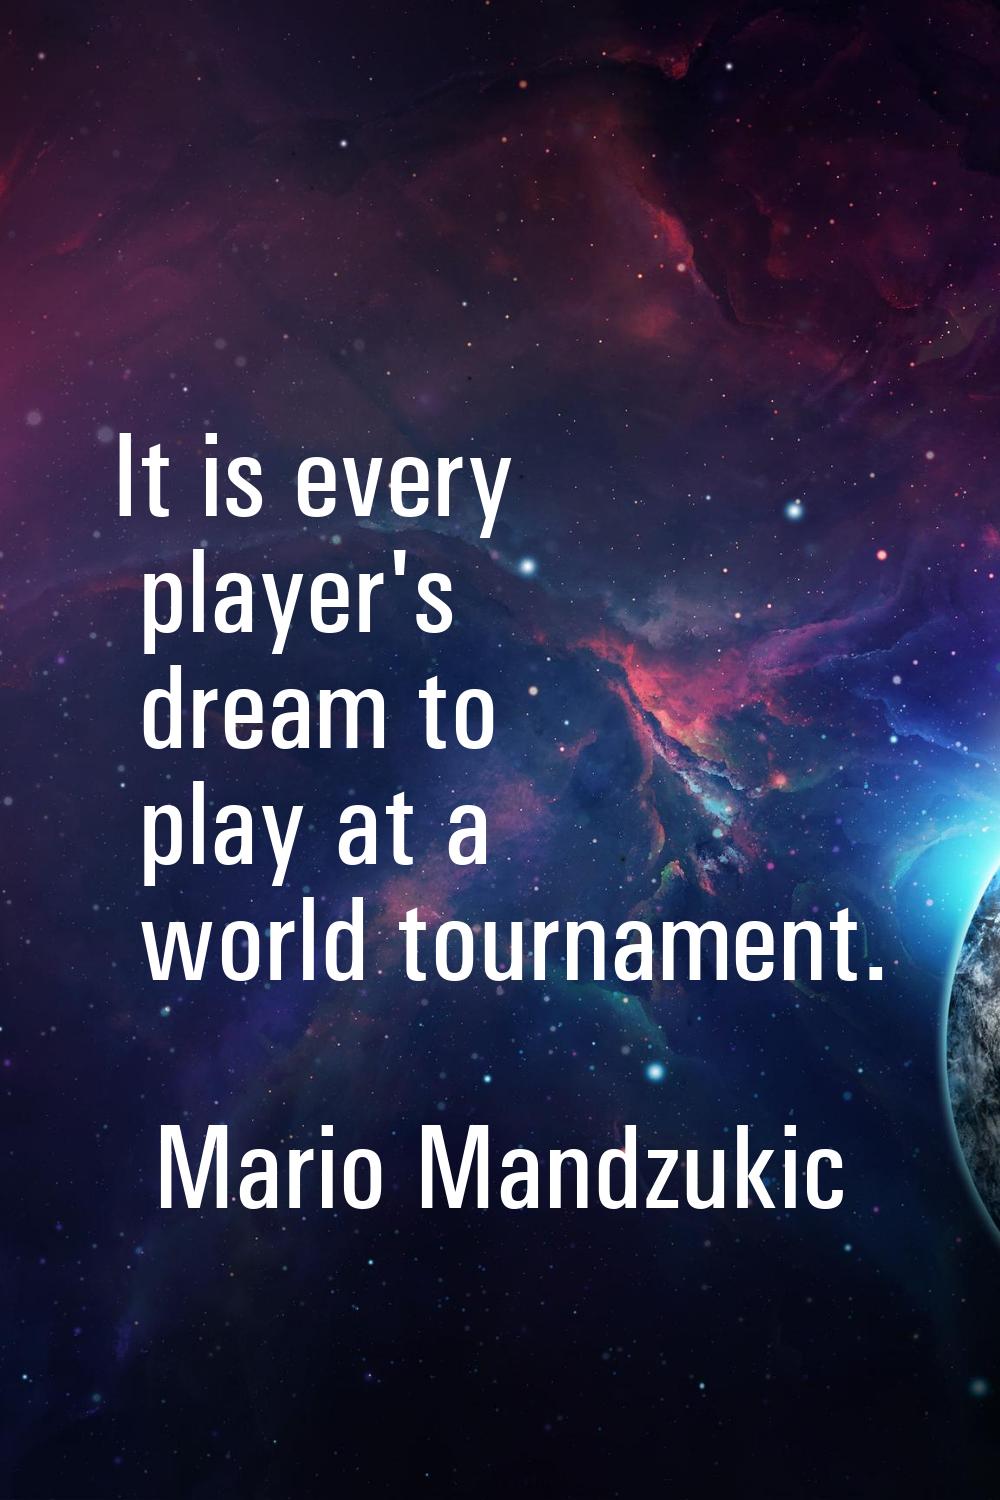 It is every player's dream to play at a world tournament.